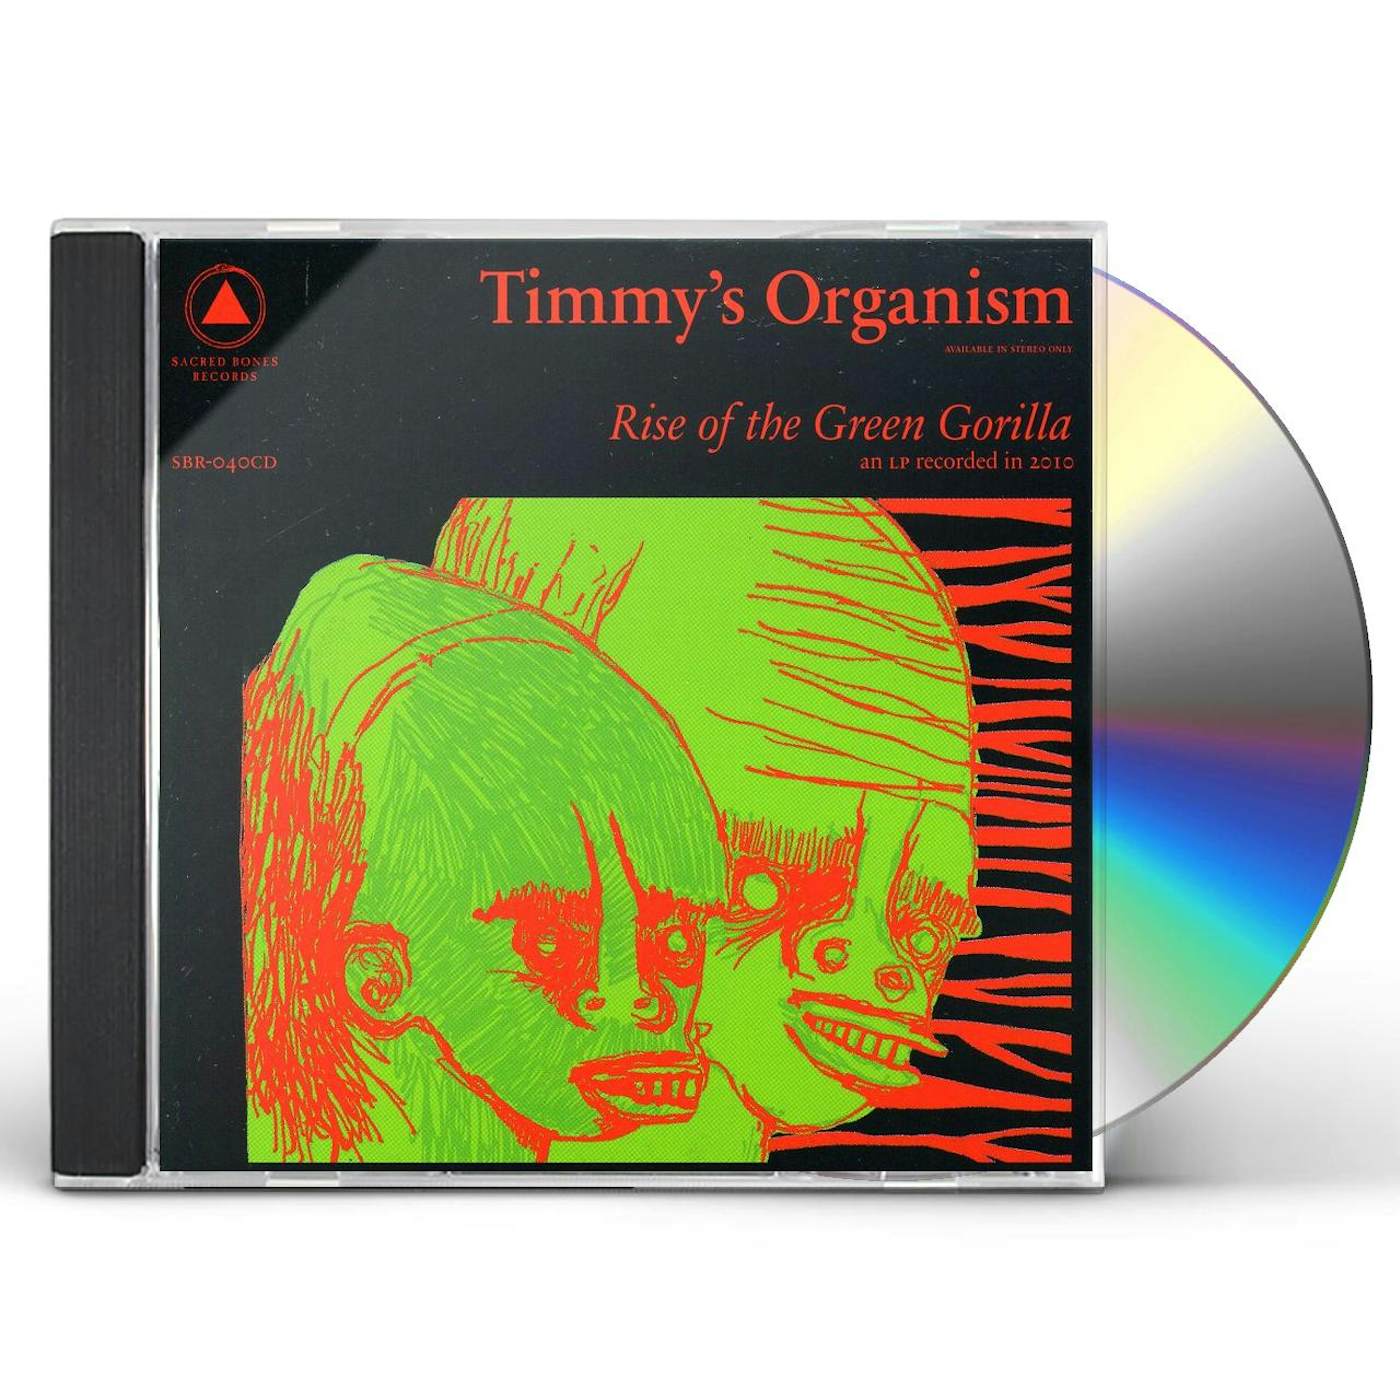 Timmy's Organism RISE OF THE GREEN GORILLA CD